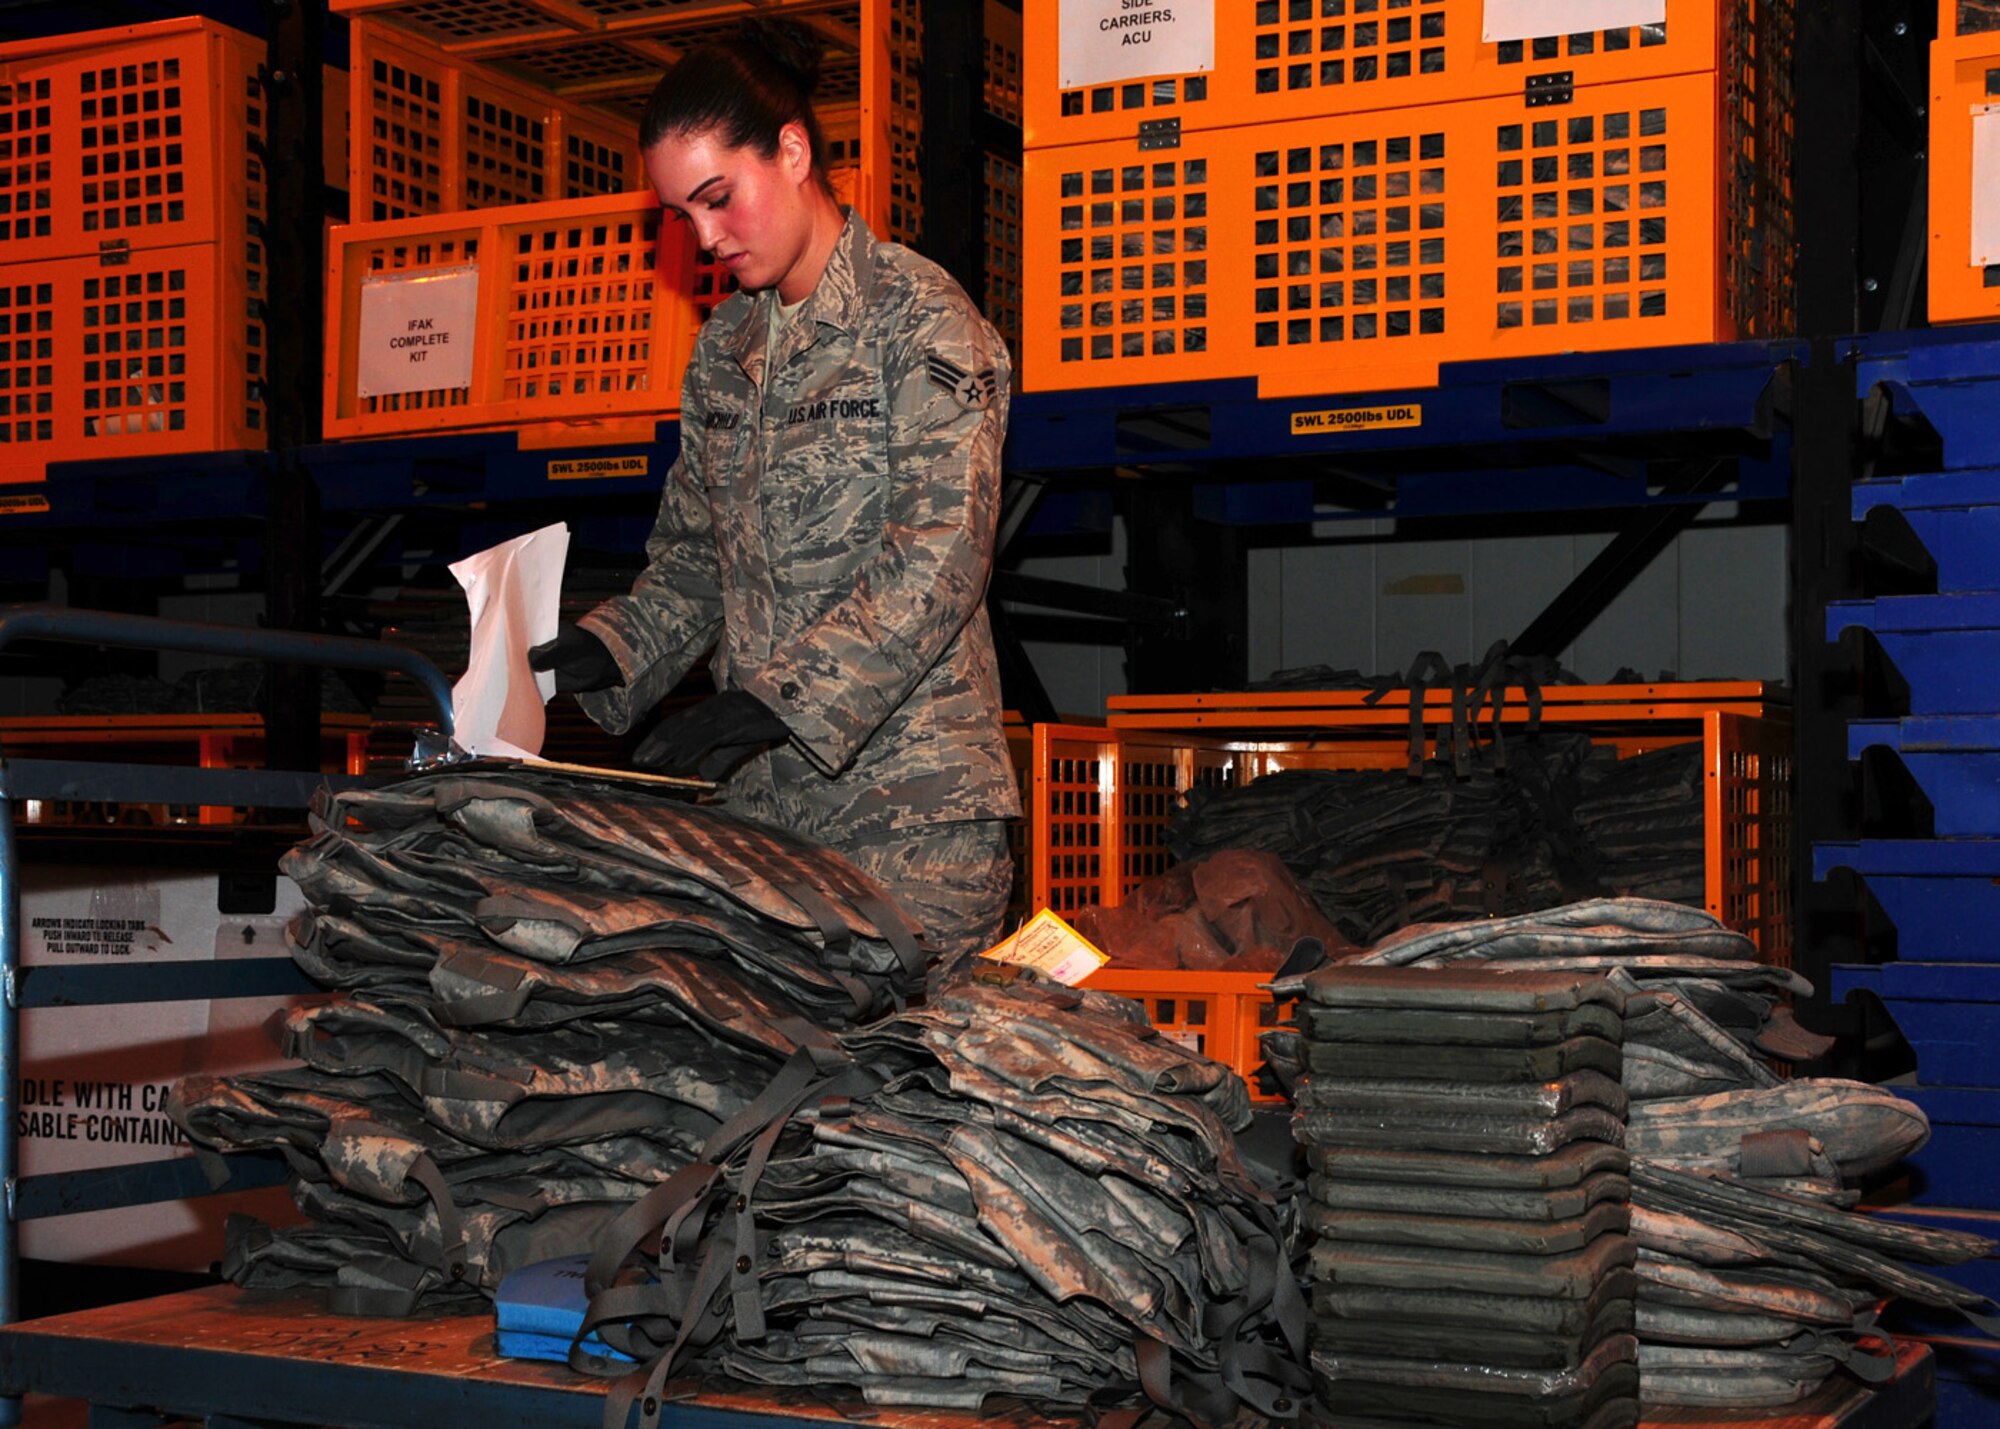 SOUTHWEST ASIA -- Senior Airman Jessica Fairchild, 386th Expeditionary Logistic Readiness Squadron, verifies against her list for the amount and size of body amour required at the 386th Expeditionary Theater Distribution Center at an air base in Southwest Asia, May 29. The ETDC issues IBA vests with plates, chemical warfare bags, cold weather gear, first aid kits and many other mobility items to reduce the amount of extra baggage the Airmen deploy with.  Airman Fairchild is deployed from Seymour Johnson Air Force Base, N.C. and is originally from Midland, Mich. (U.S. Air Force photo/ Senior Airman Courtney Richardson)